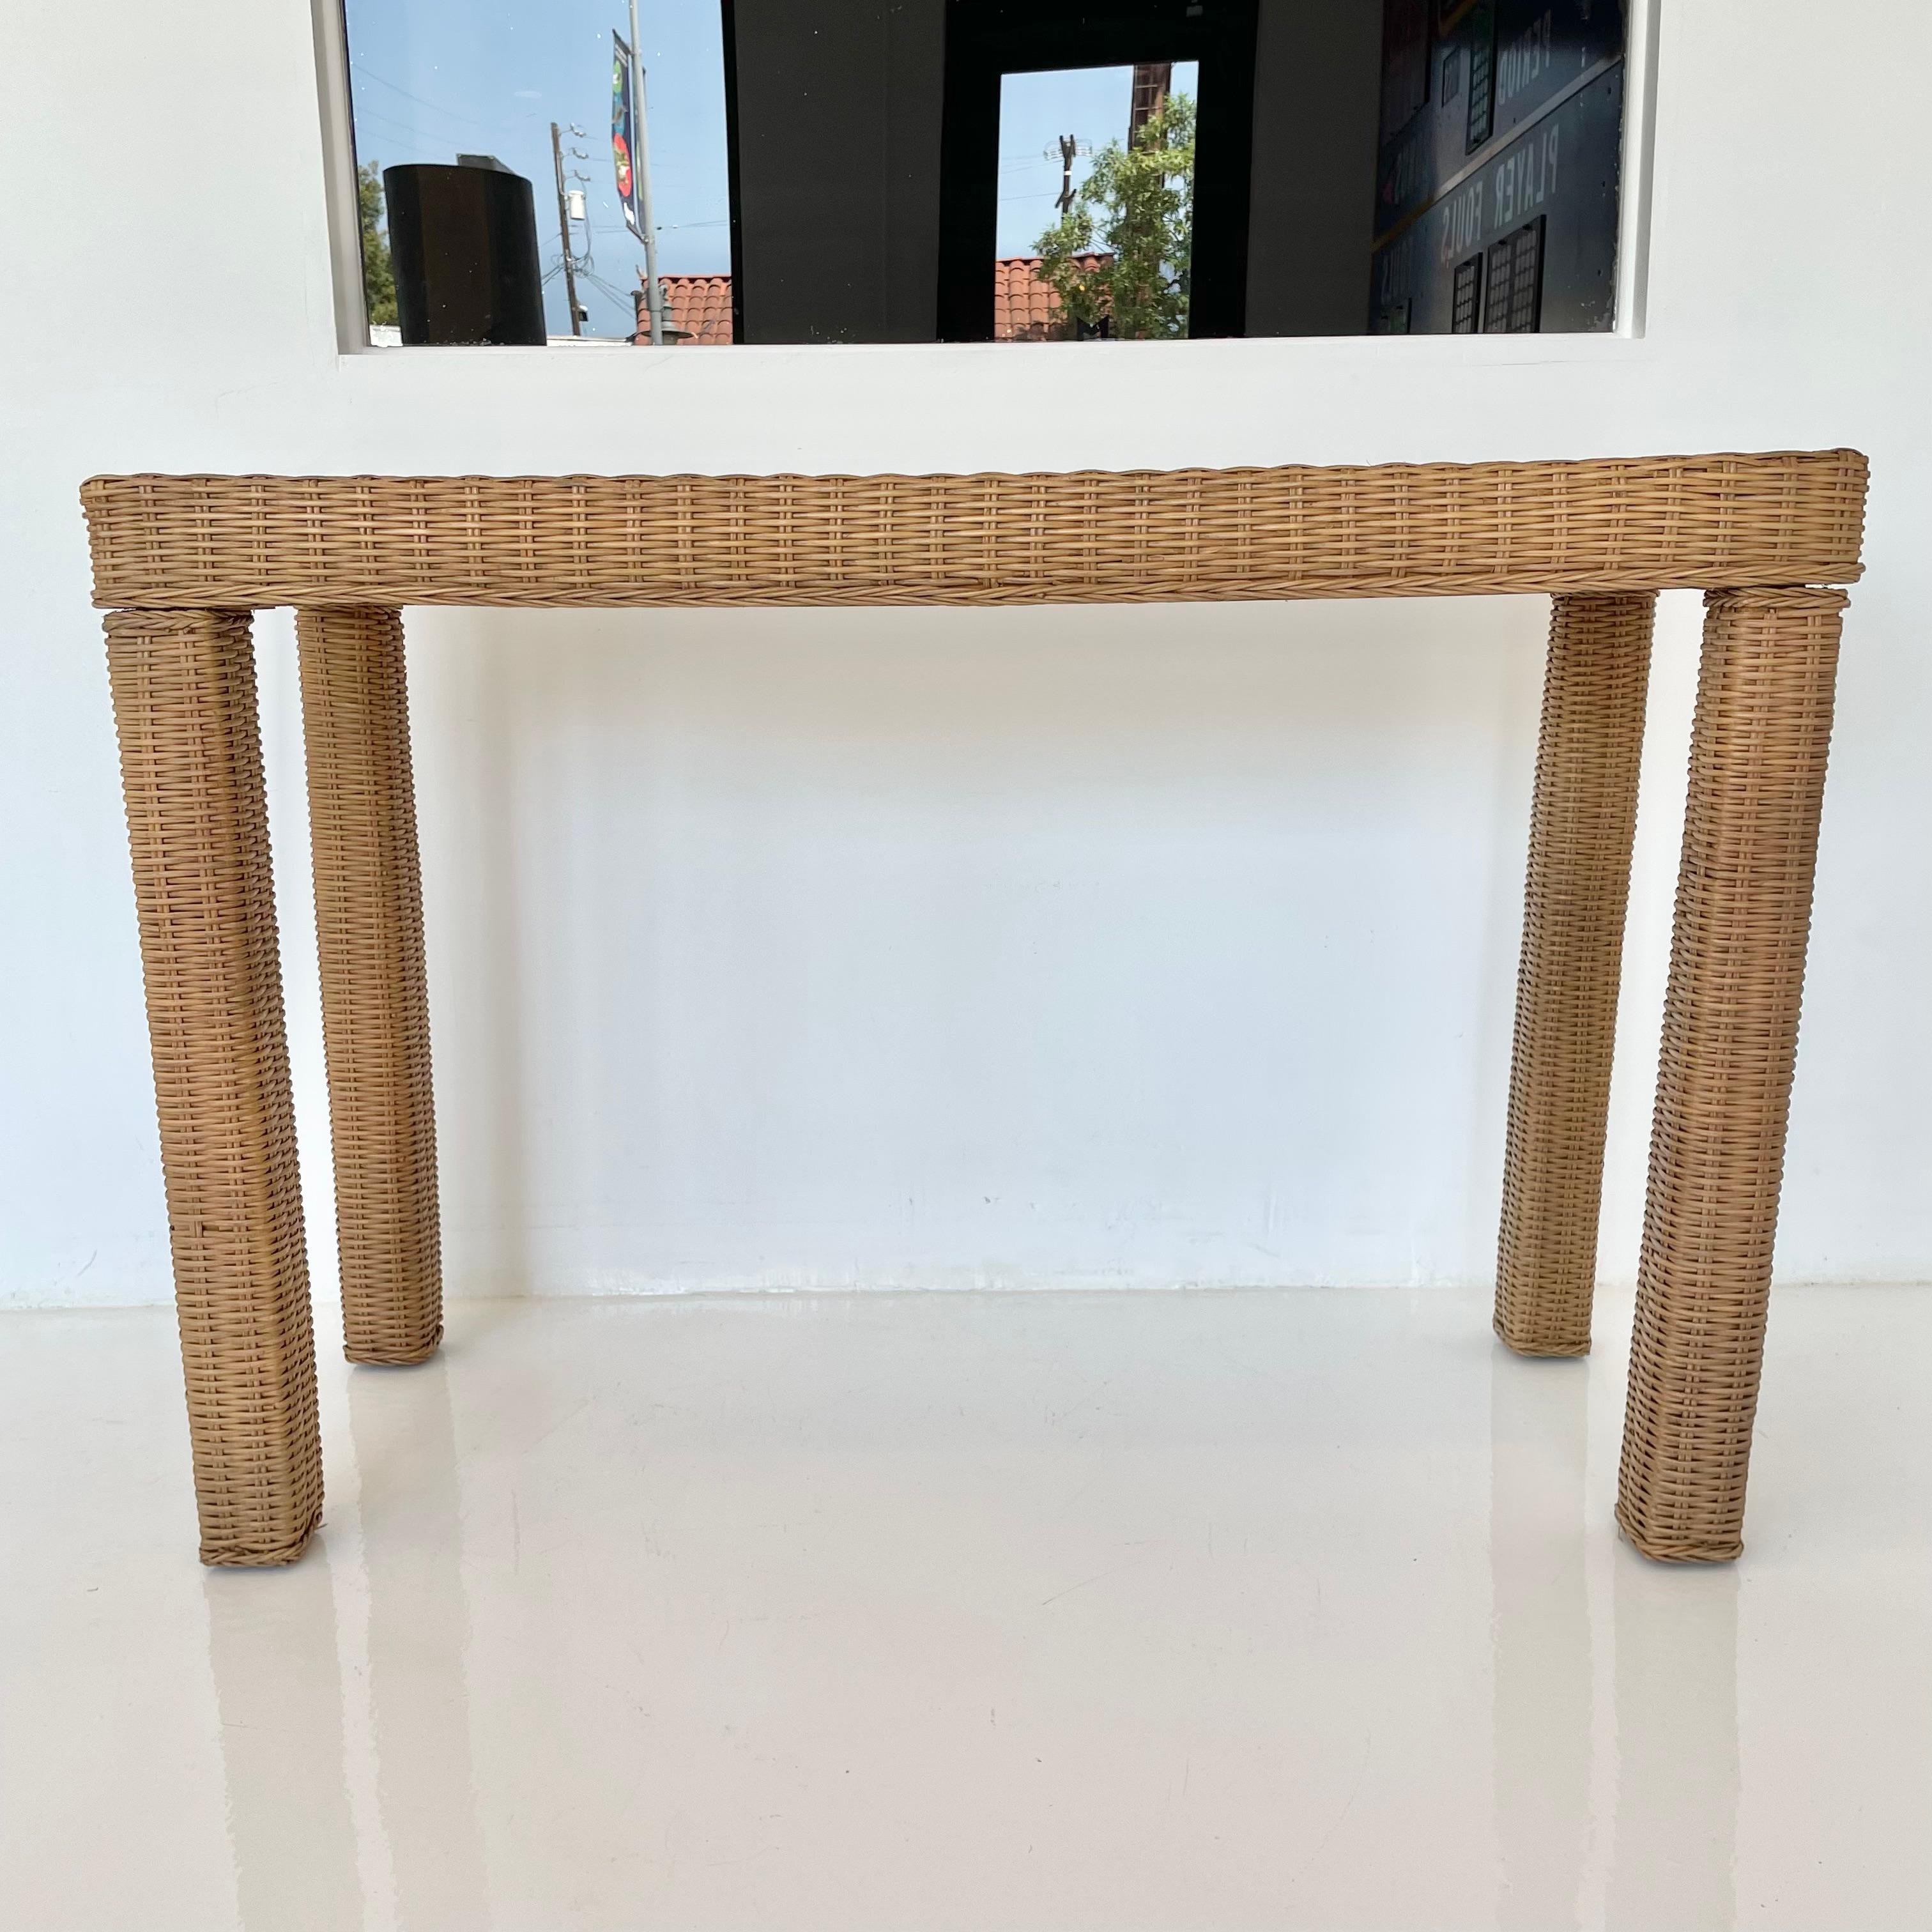 Wicker console table with solid wood frame. Good vintage condition. Perfect entry way console. Also the perfect size/shape for behind the sofa. Classic lines and design.


